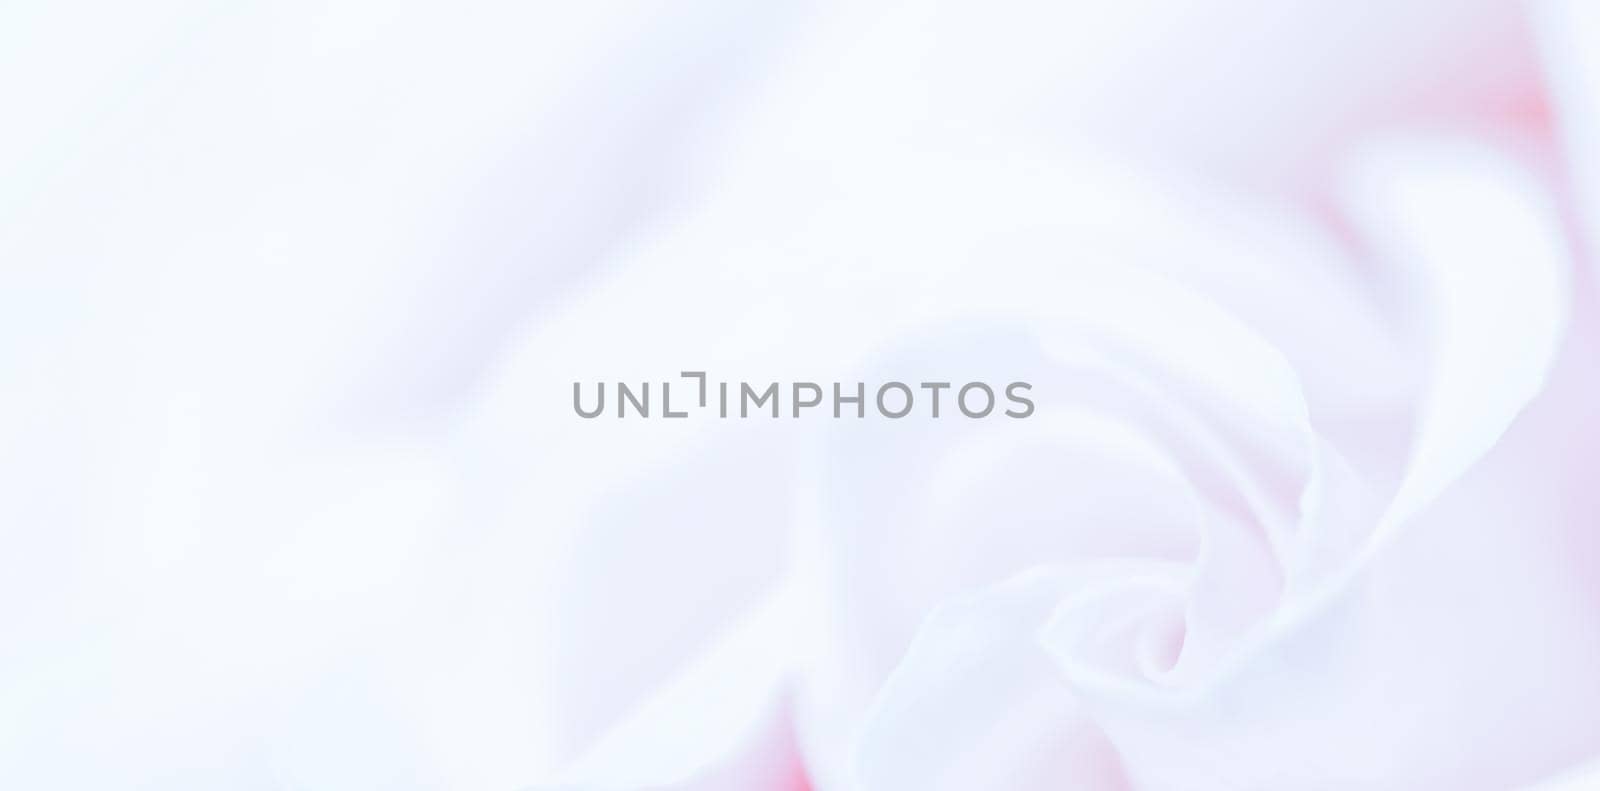 Botanical concept, wedding invitation card - Soft focus, abstract floral background, purple rose flower. Macro flowers backdrop for holiday brand design